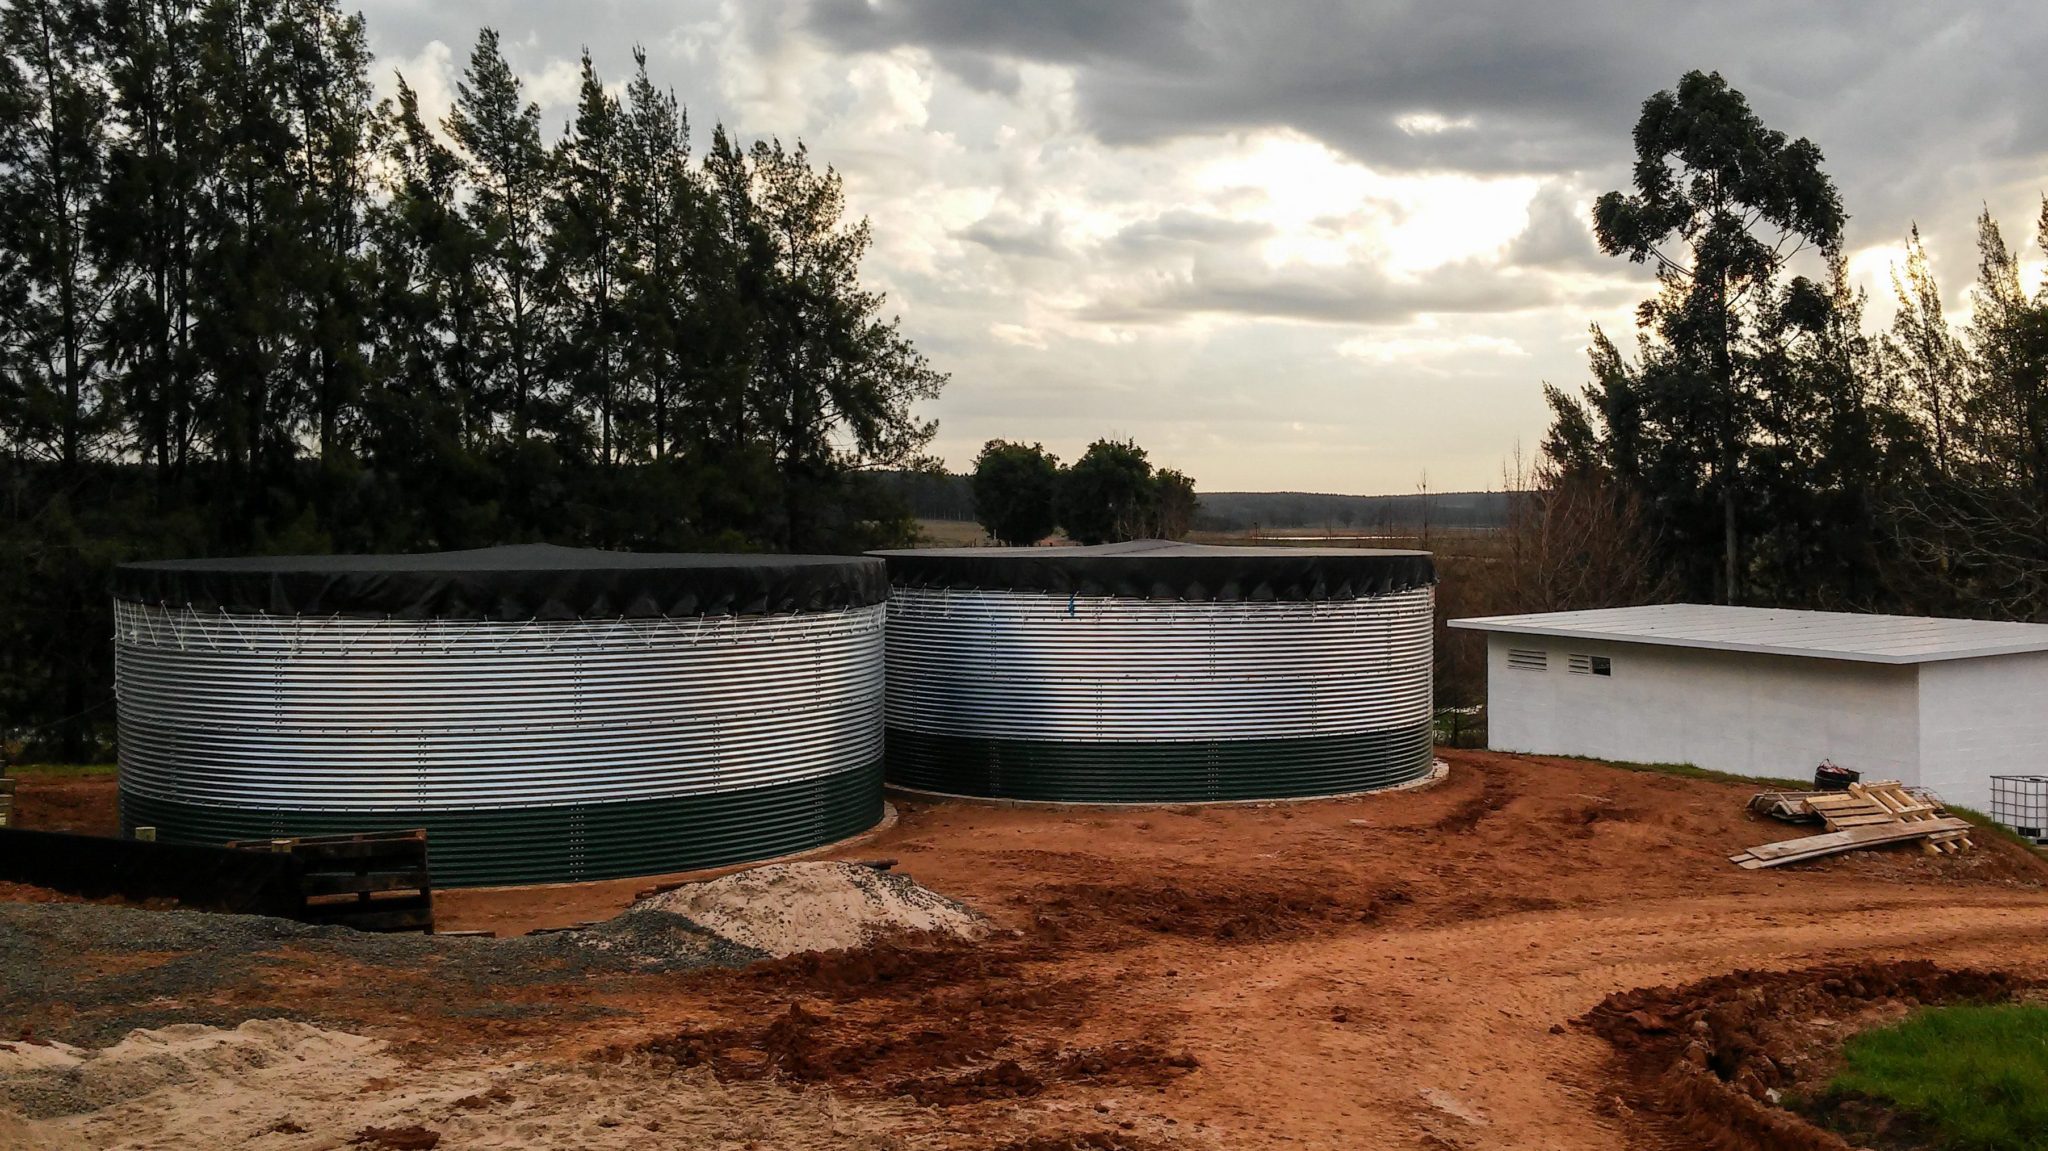 Water tanks for a forestry company, Uruguay